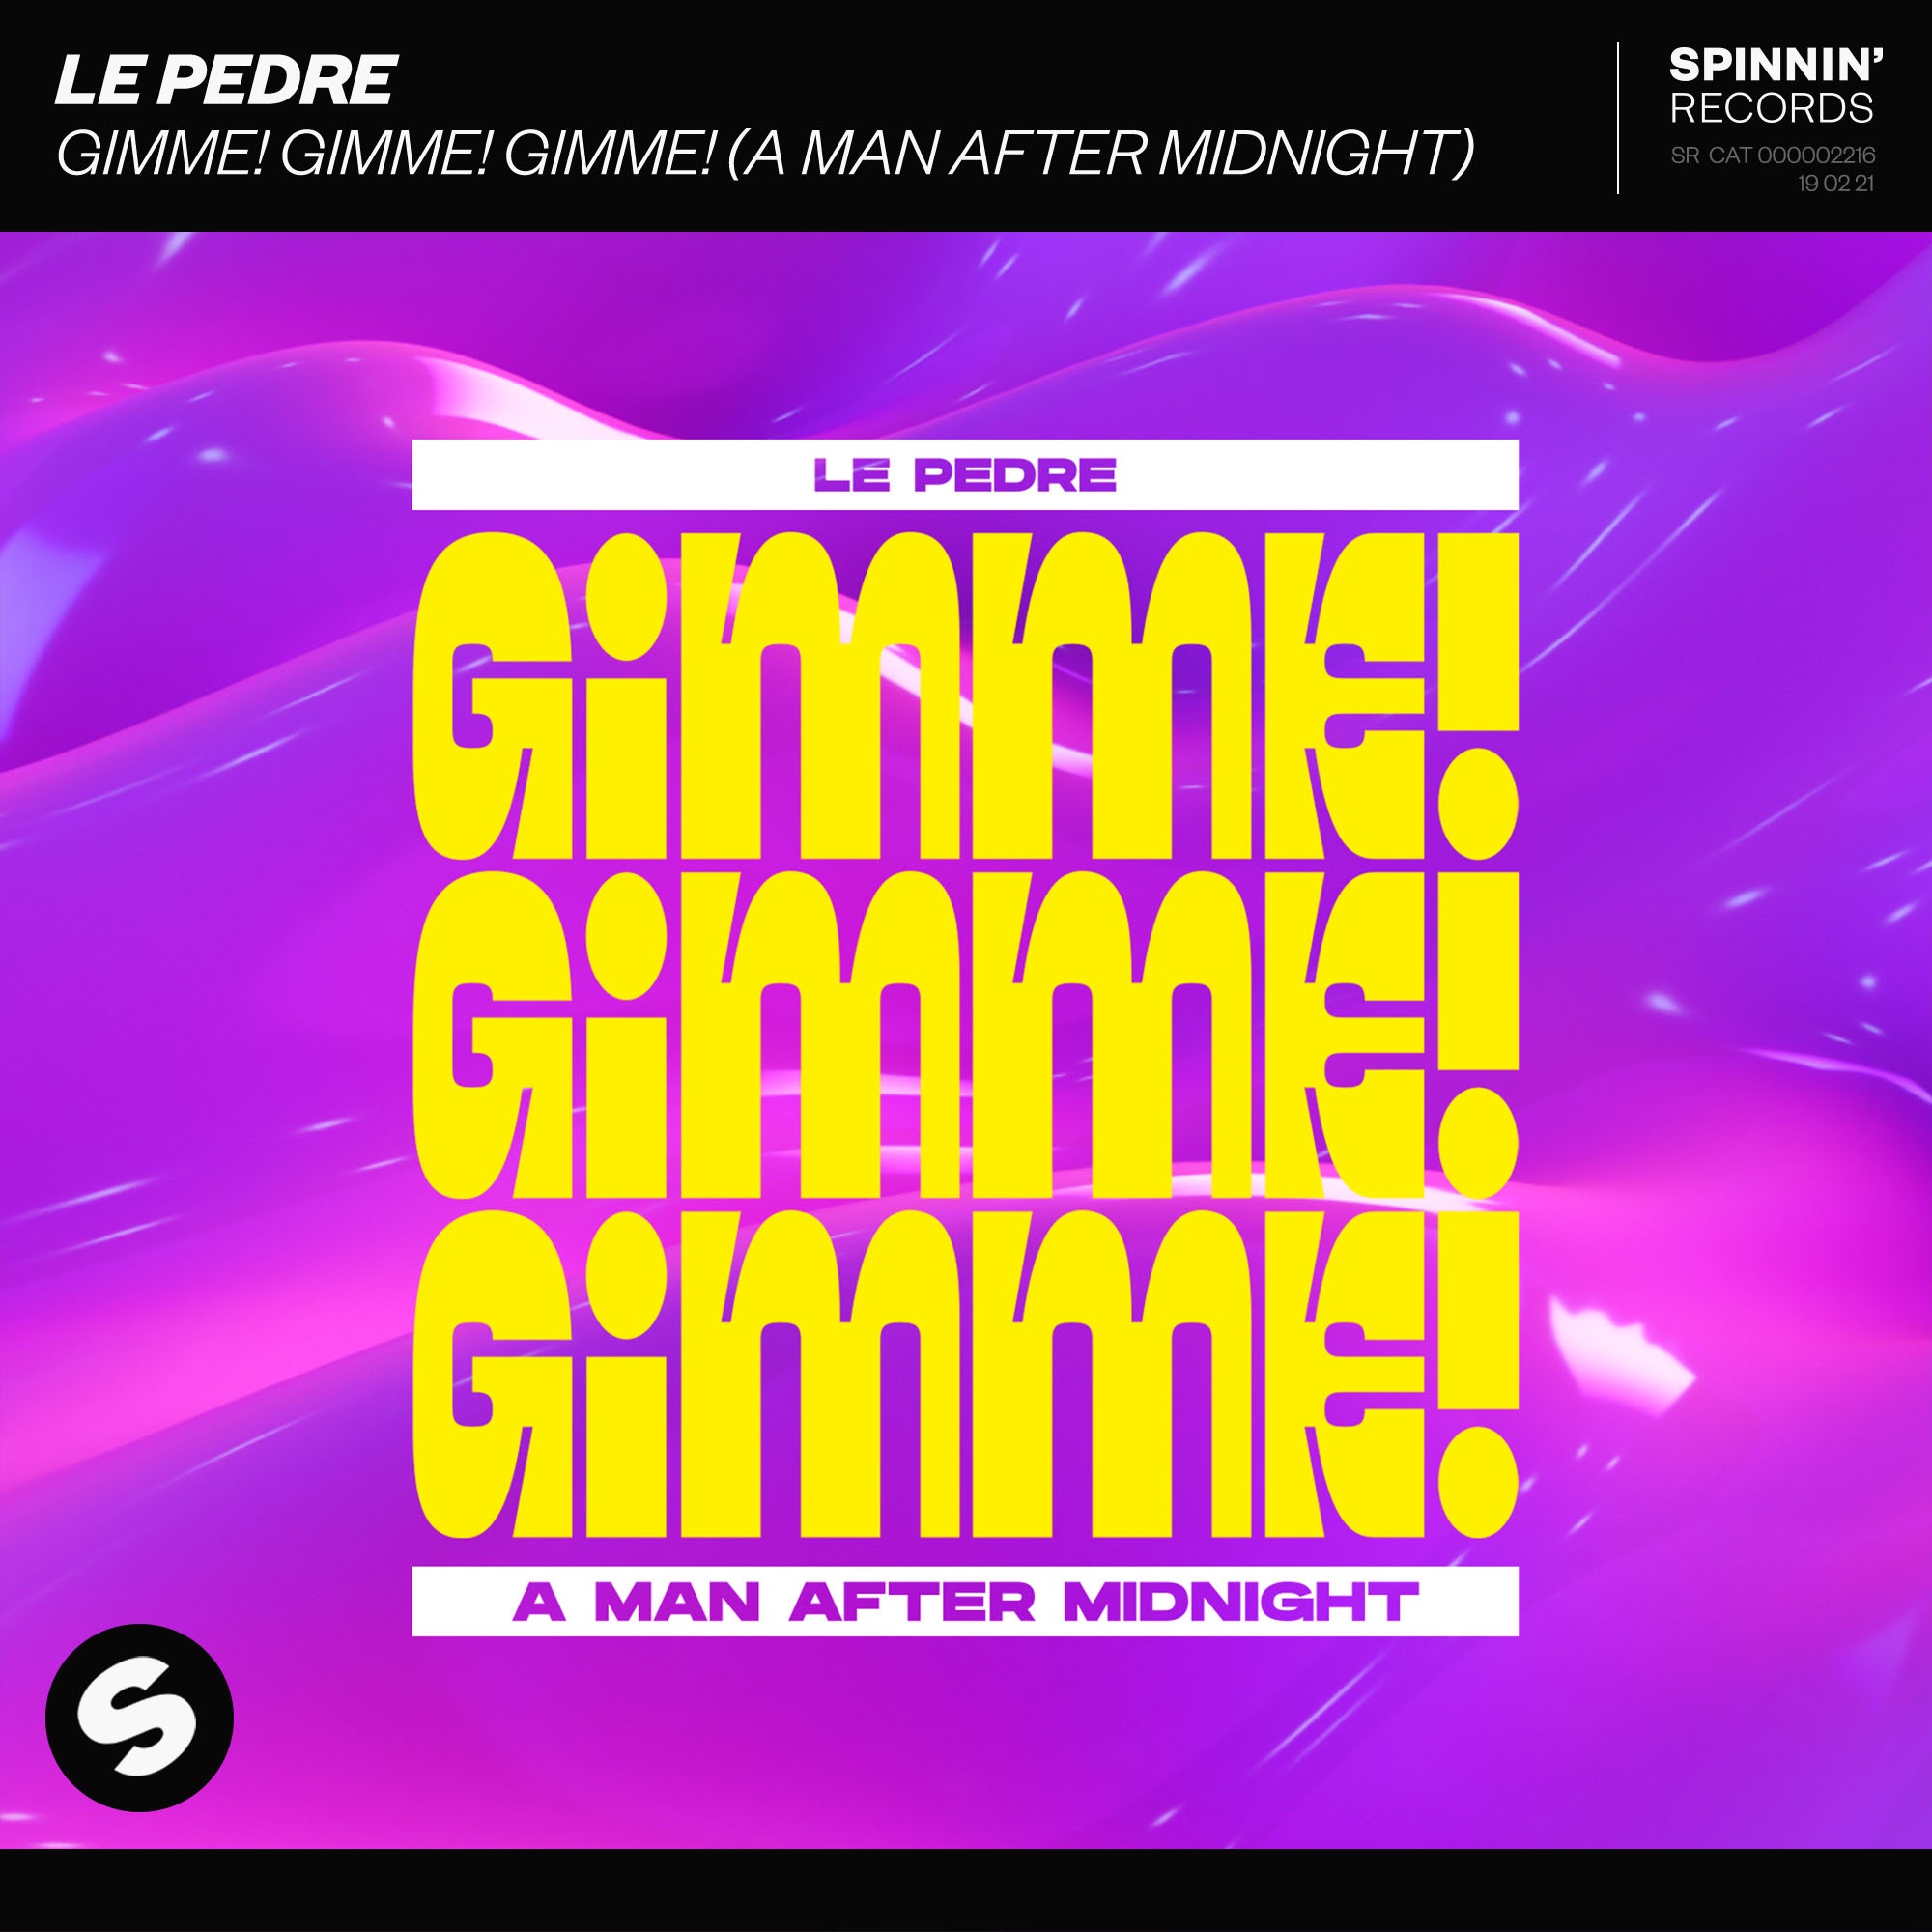 Le Pedre - Gimme! Gimme! Gimme! (A Man After Midnight) - Single